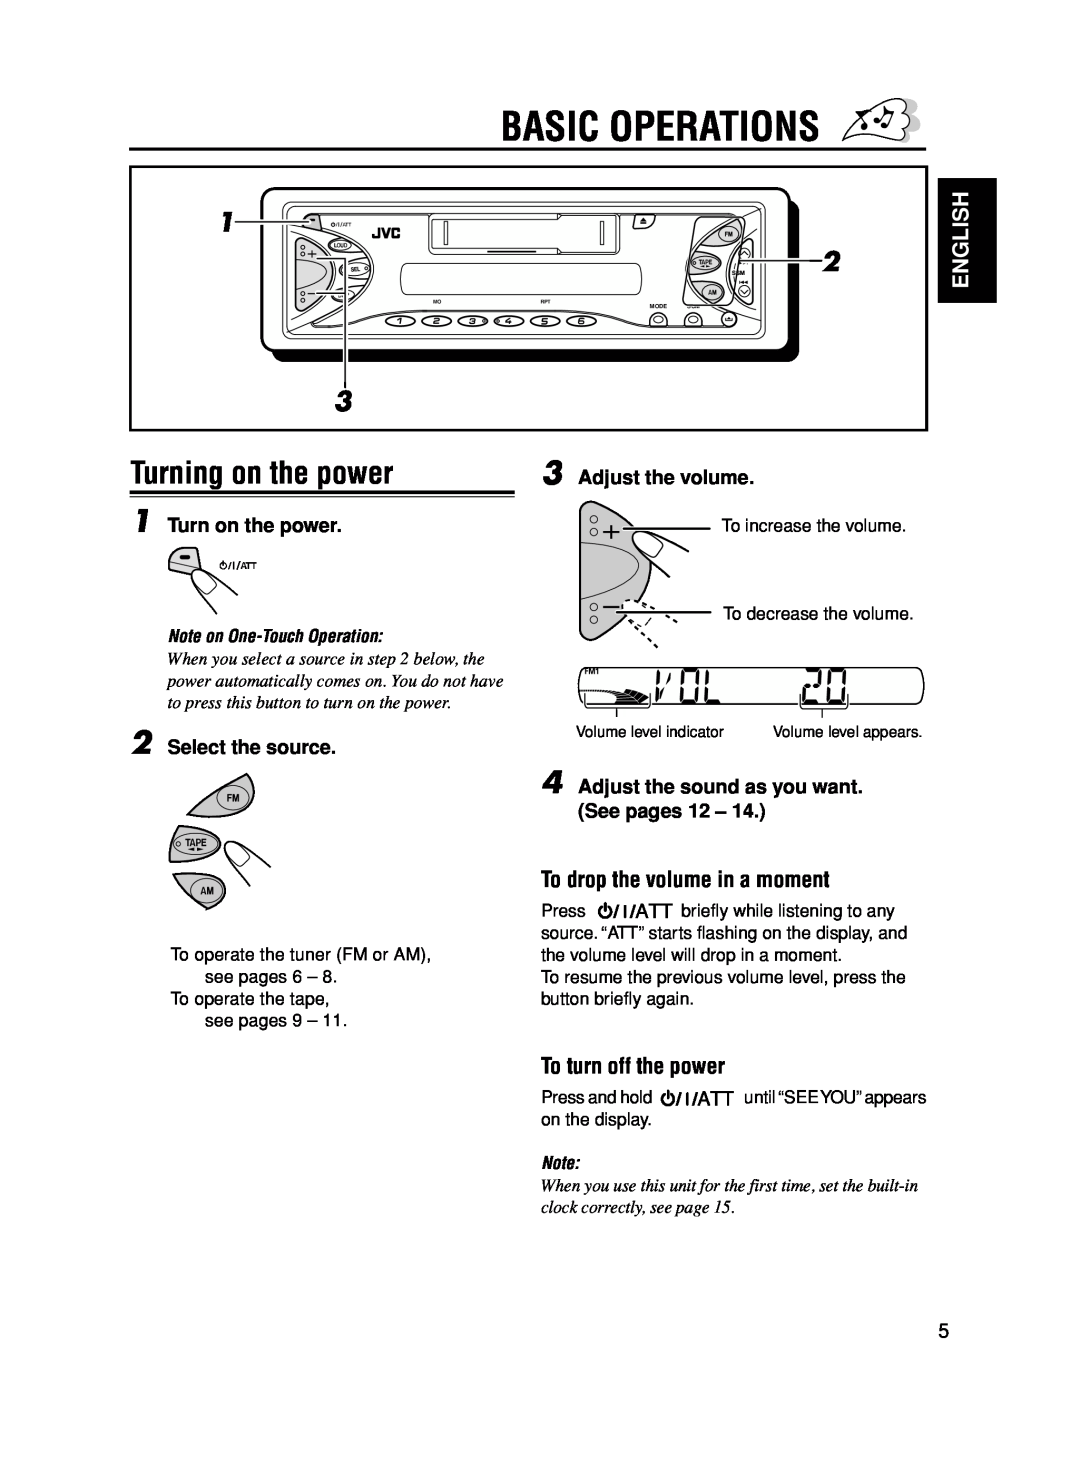 JVC KS-F545 manual Basic Operations, Turning on the power, To drop the volume in a moment, To turn off the power, English 